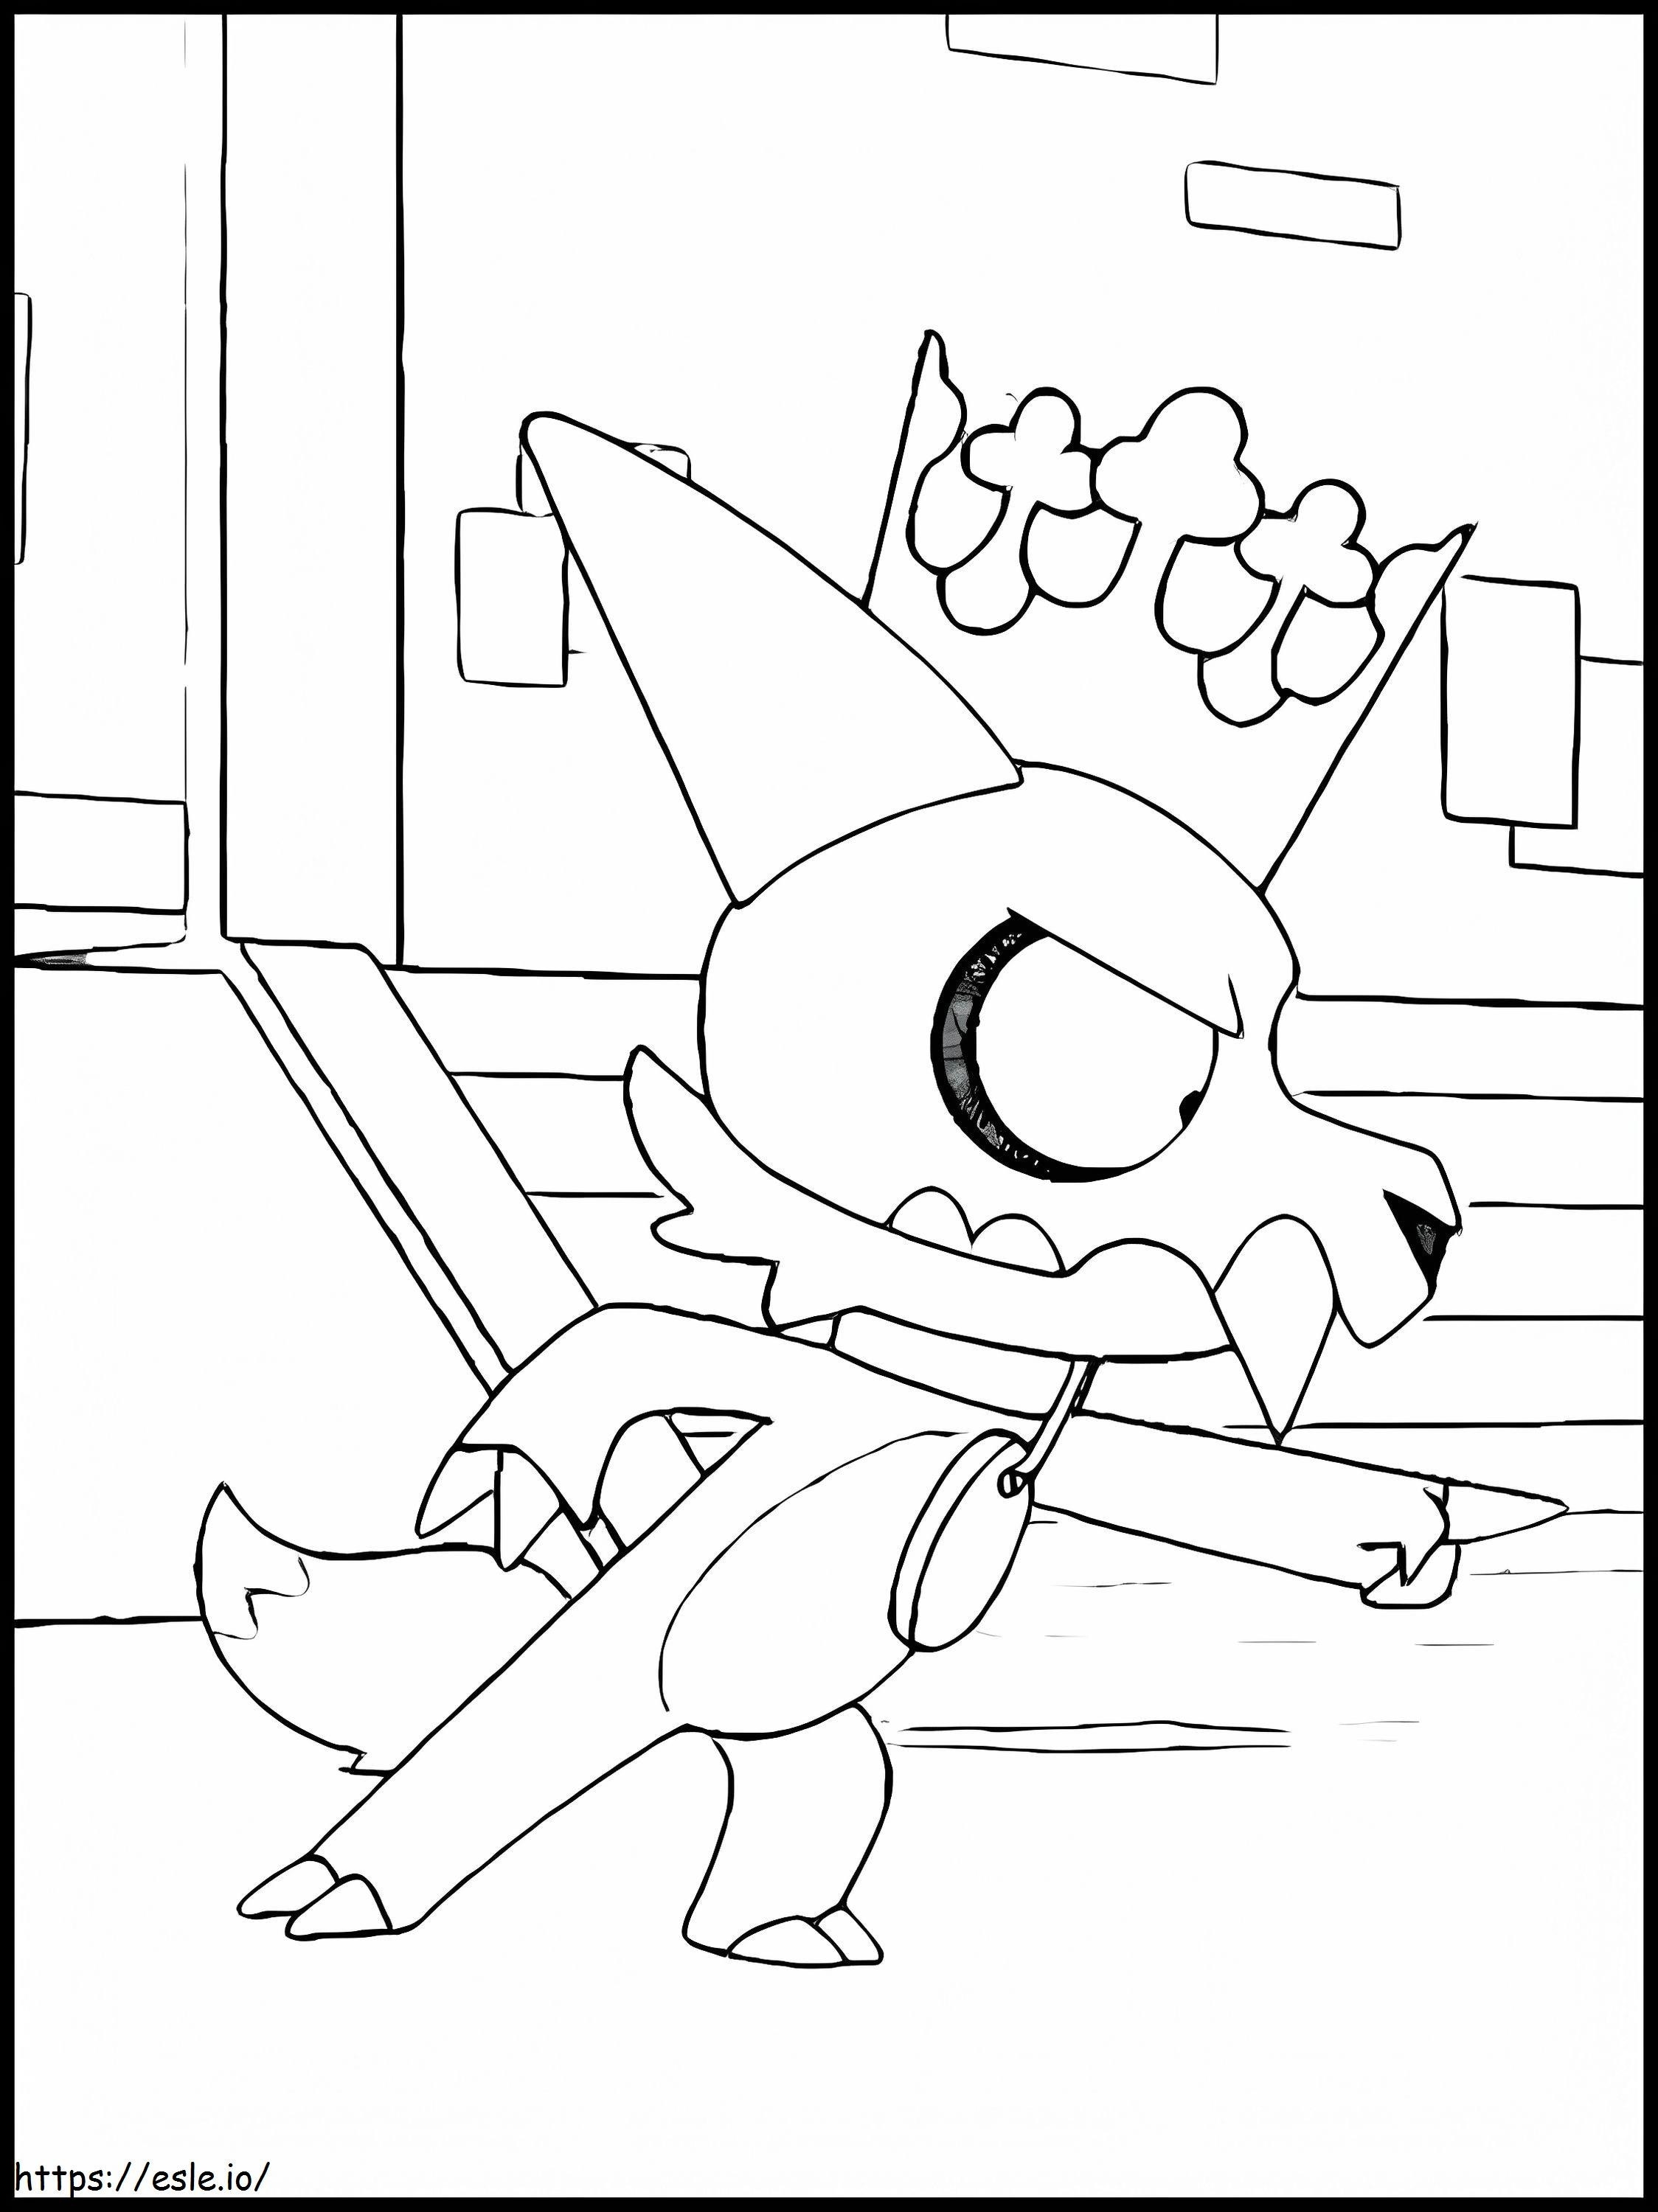 King From The Owl House coloring page